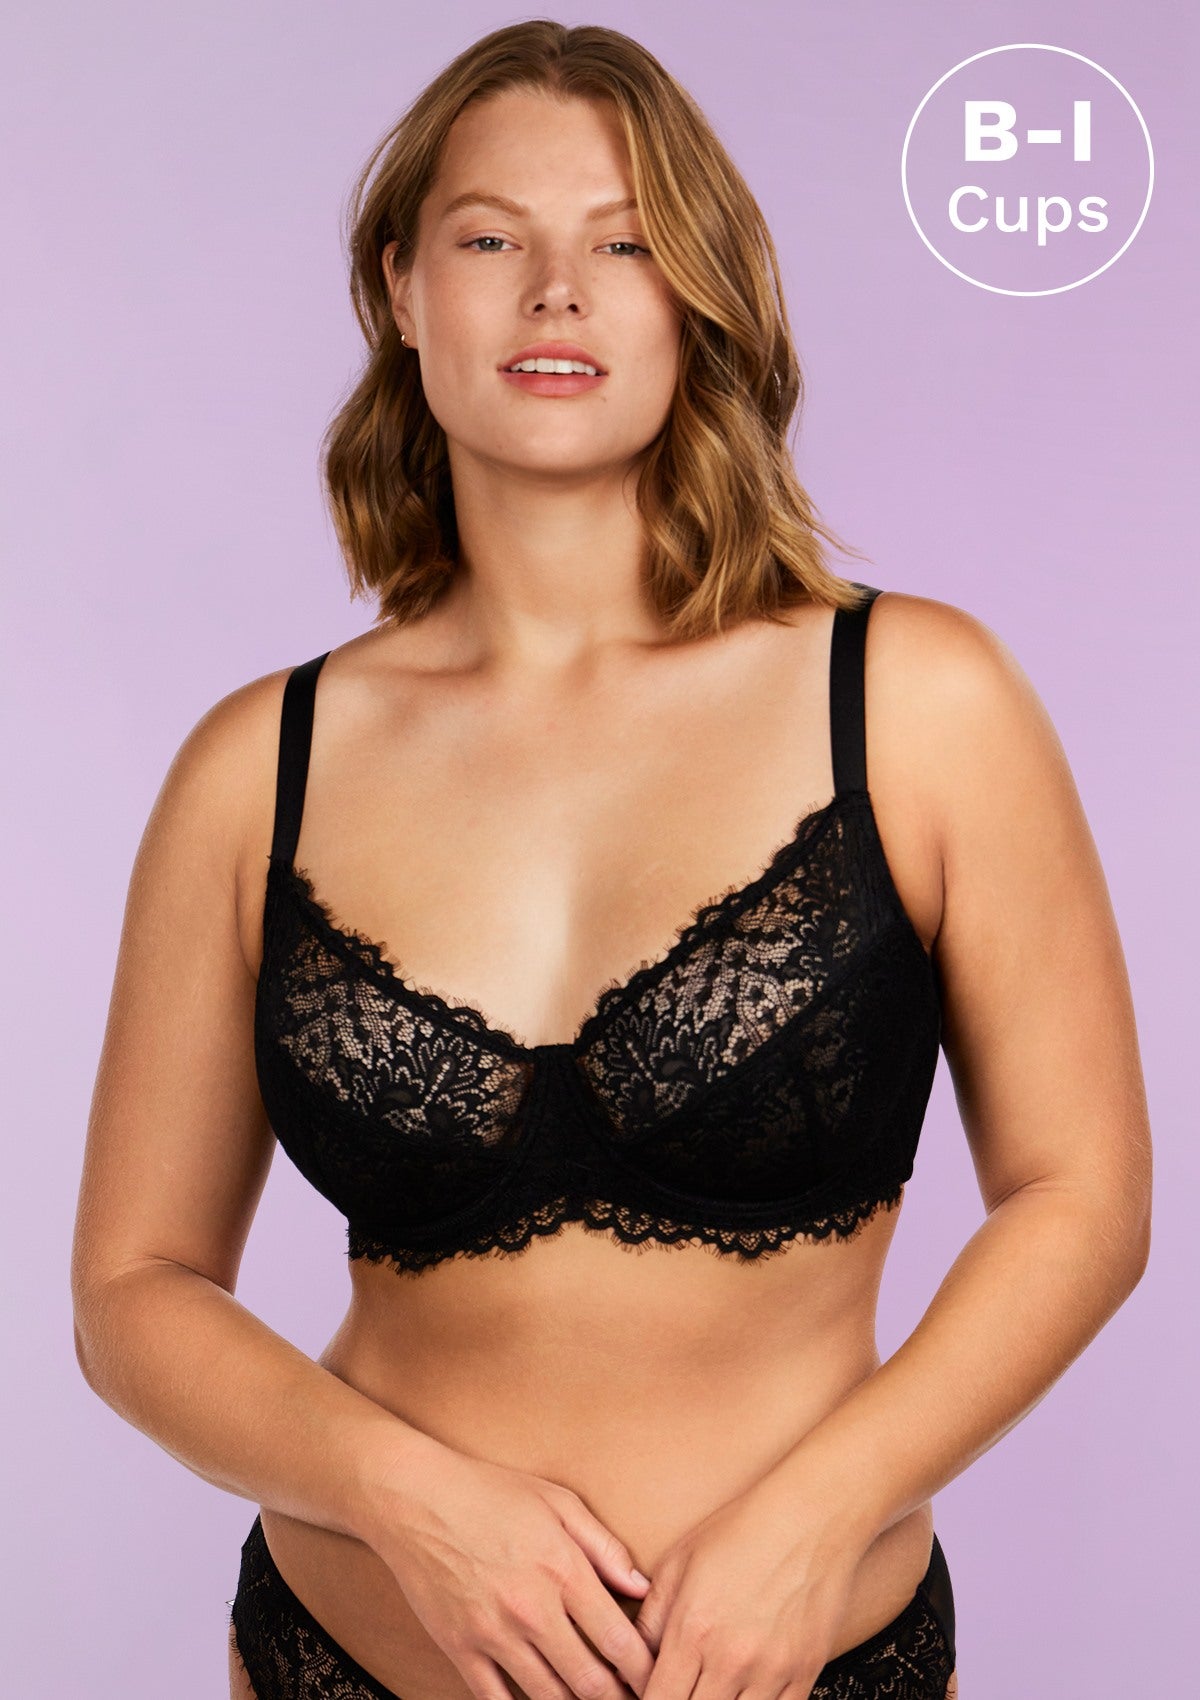 HSIA Sunflower Underwire Lace Bra: Unlined Full Coverage Support Bra - Black / 46 / D